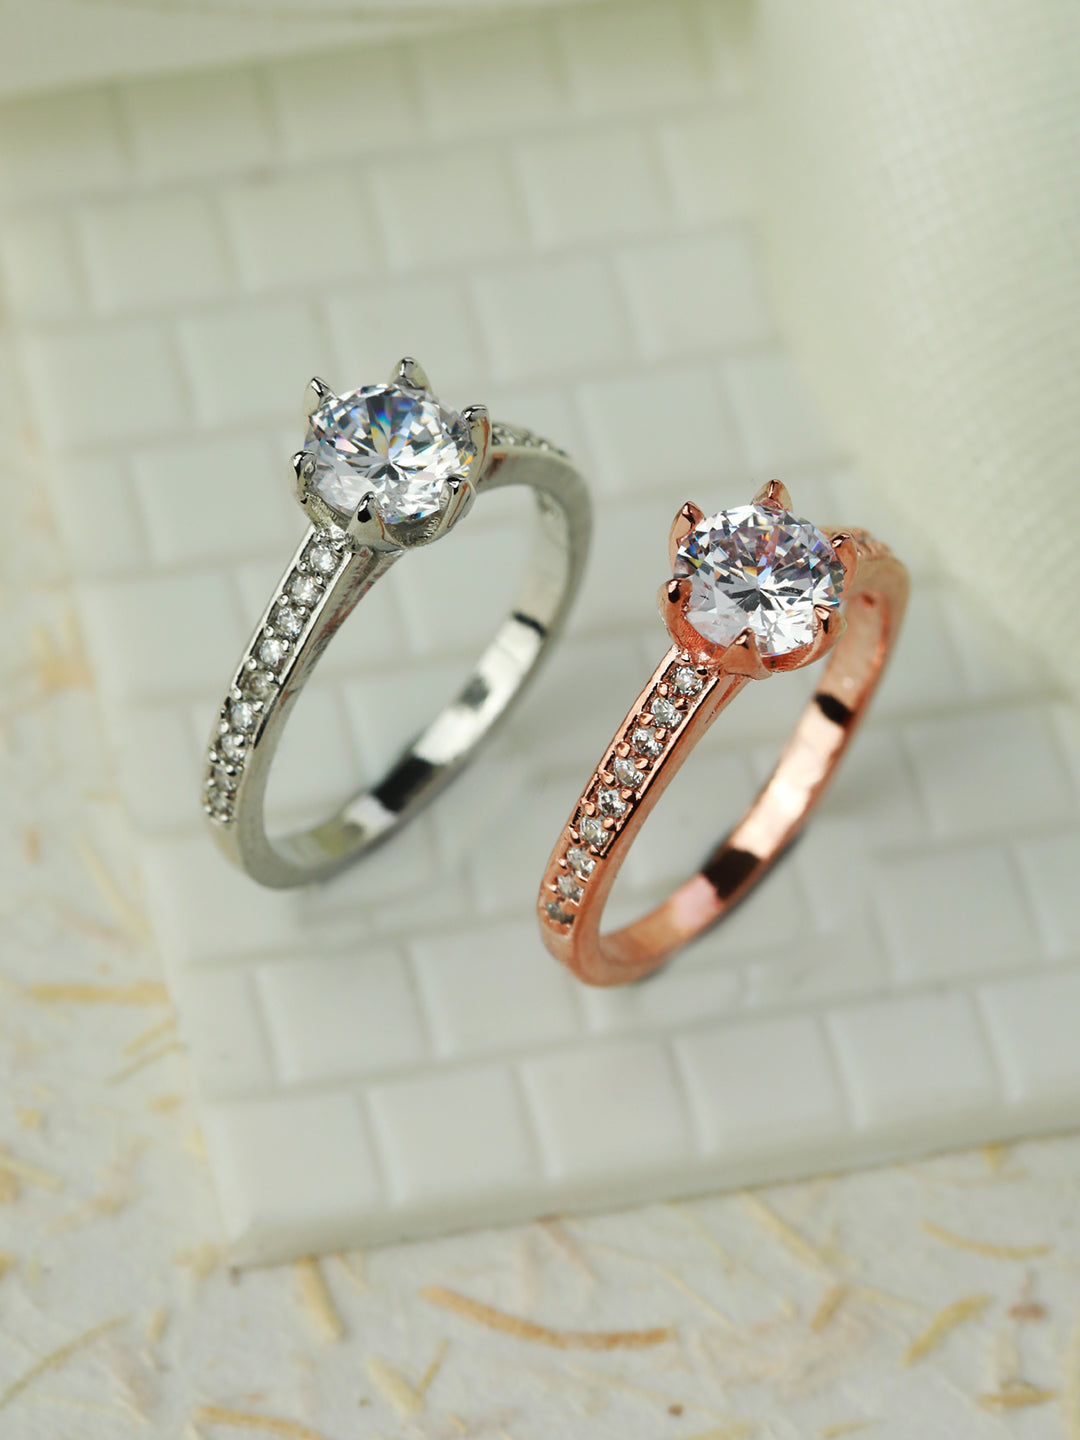 Priyaasi Solitaire Silver Rose Gold Plated Ring Set of 2